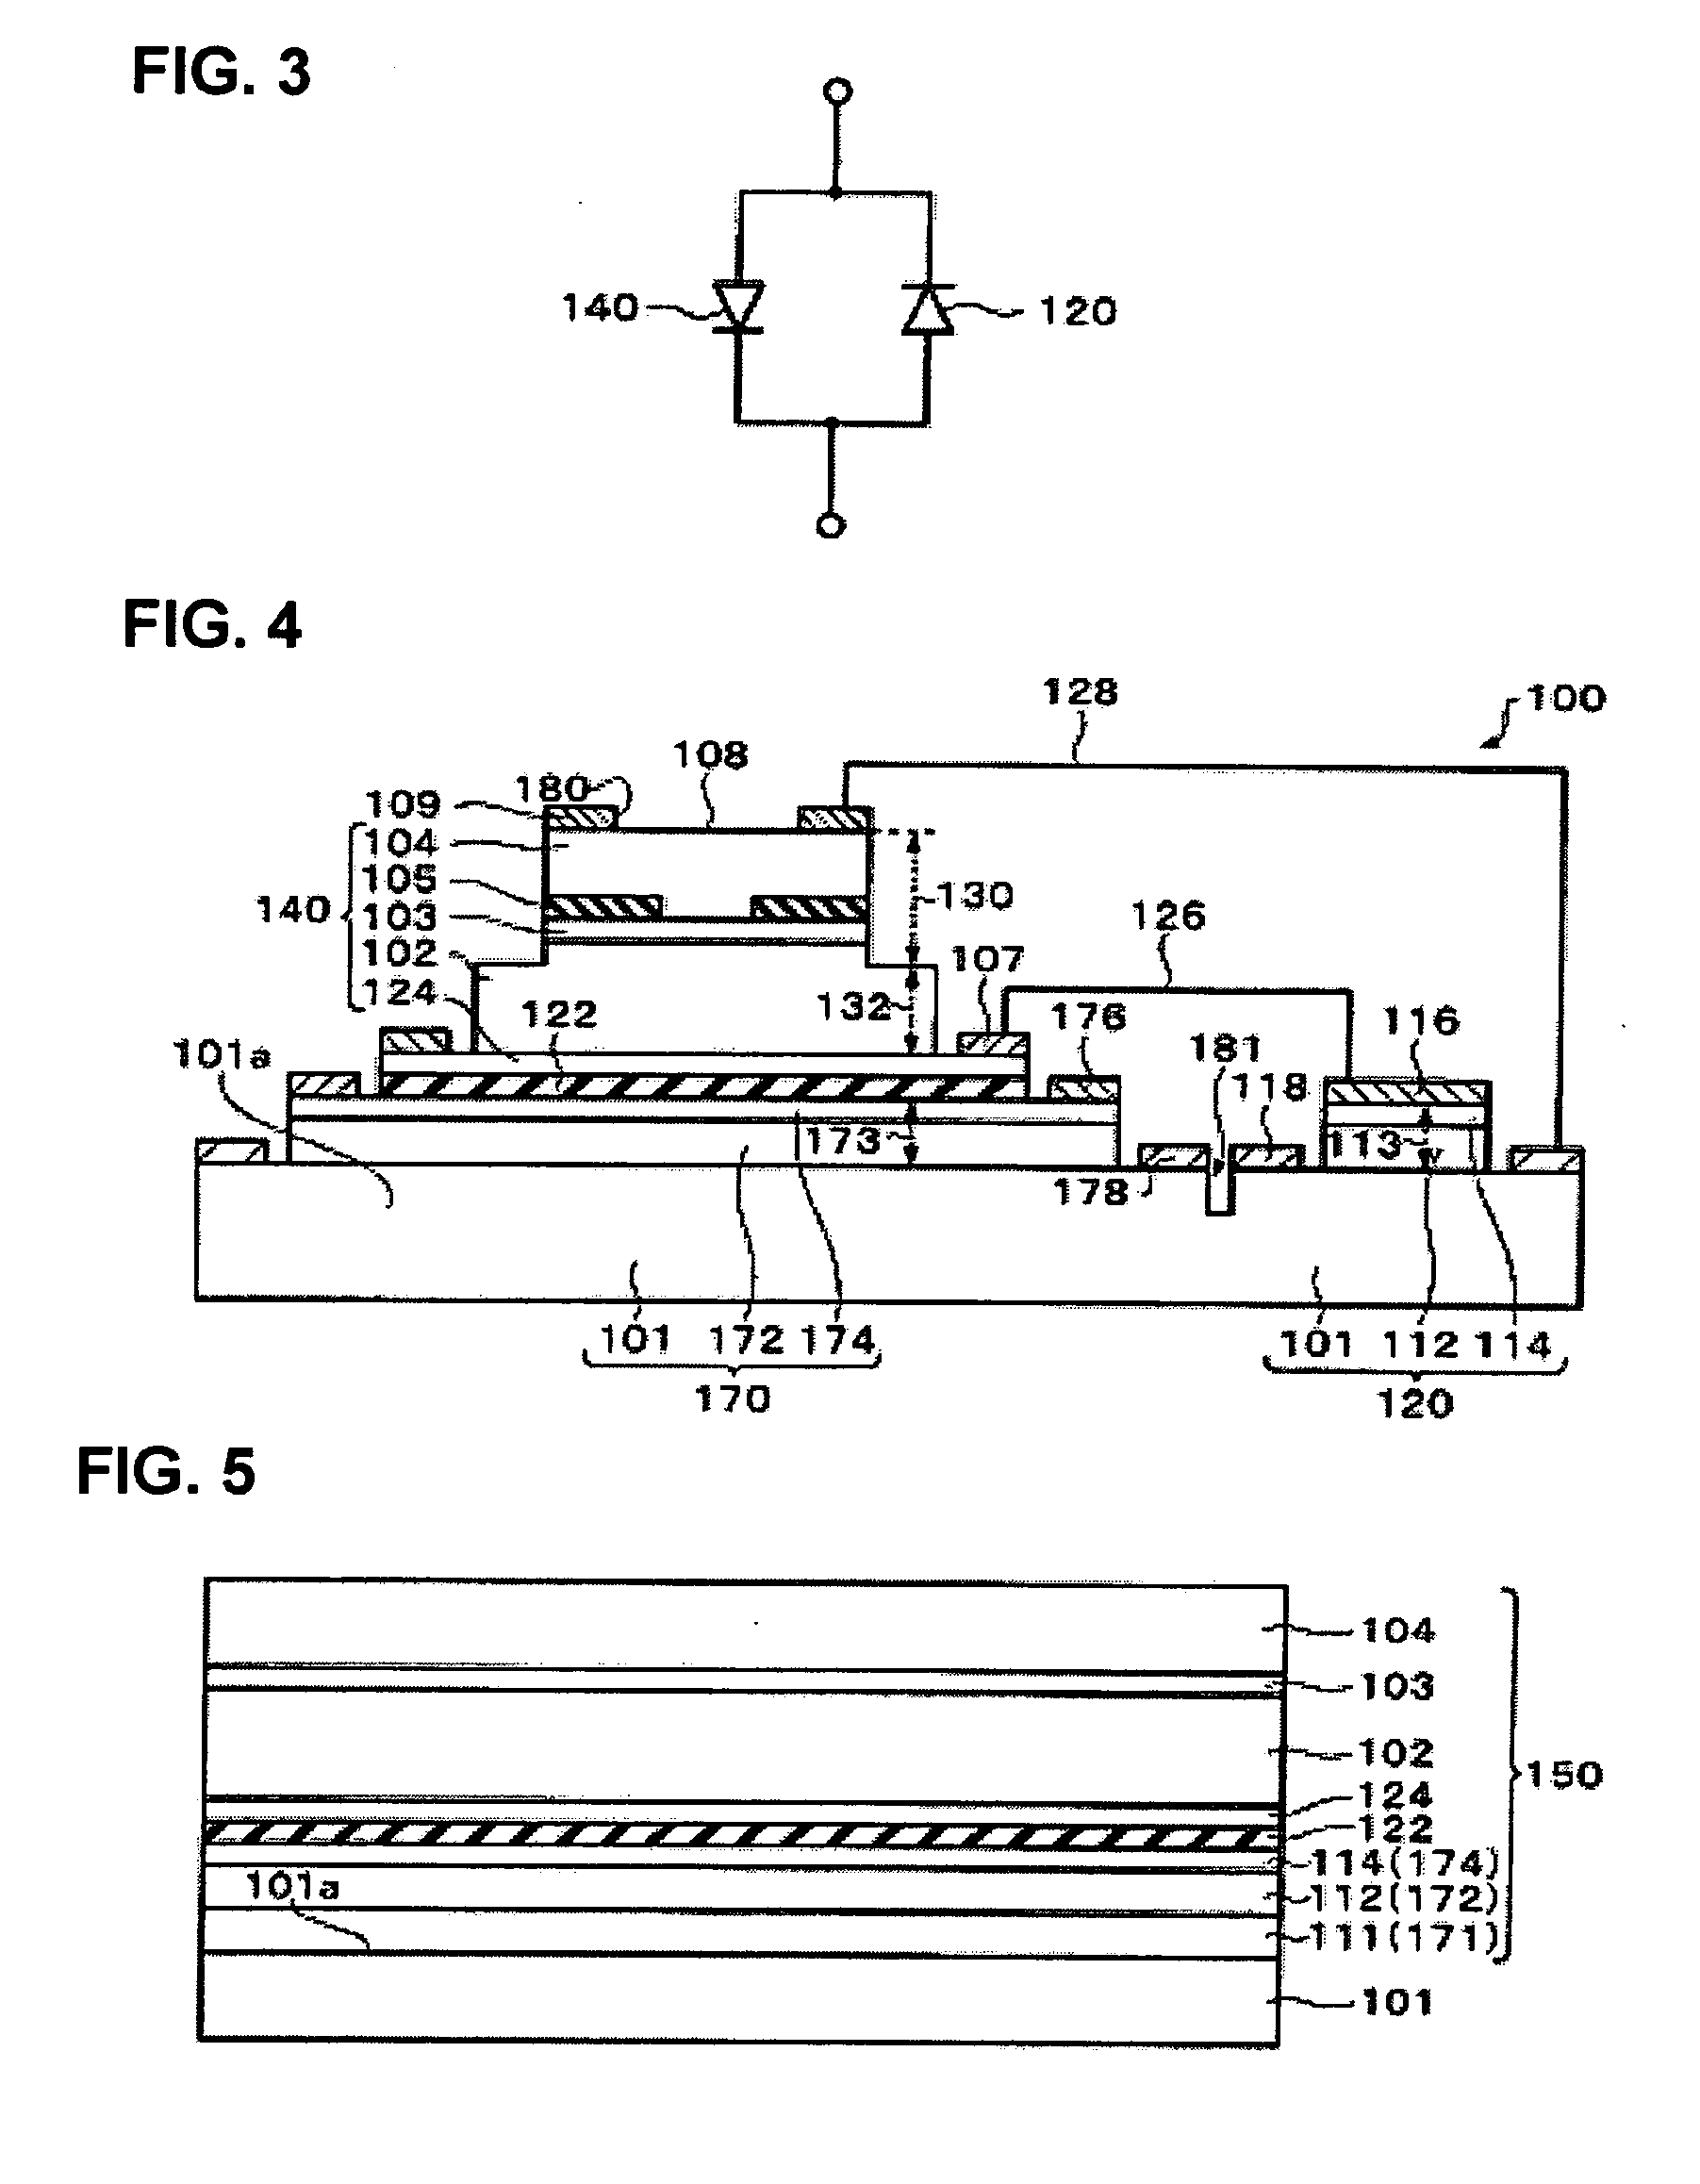 Surface emitting type device, and method for manufacturing the same